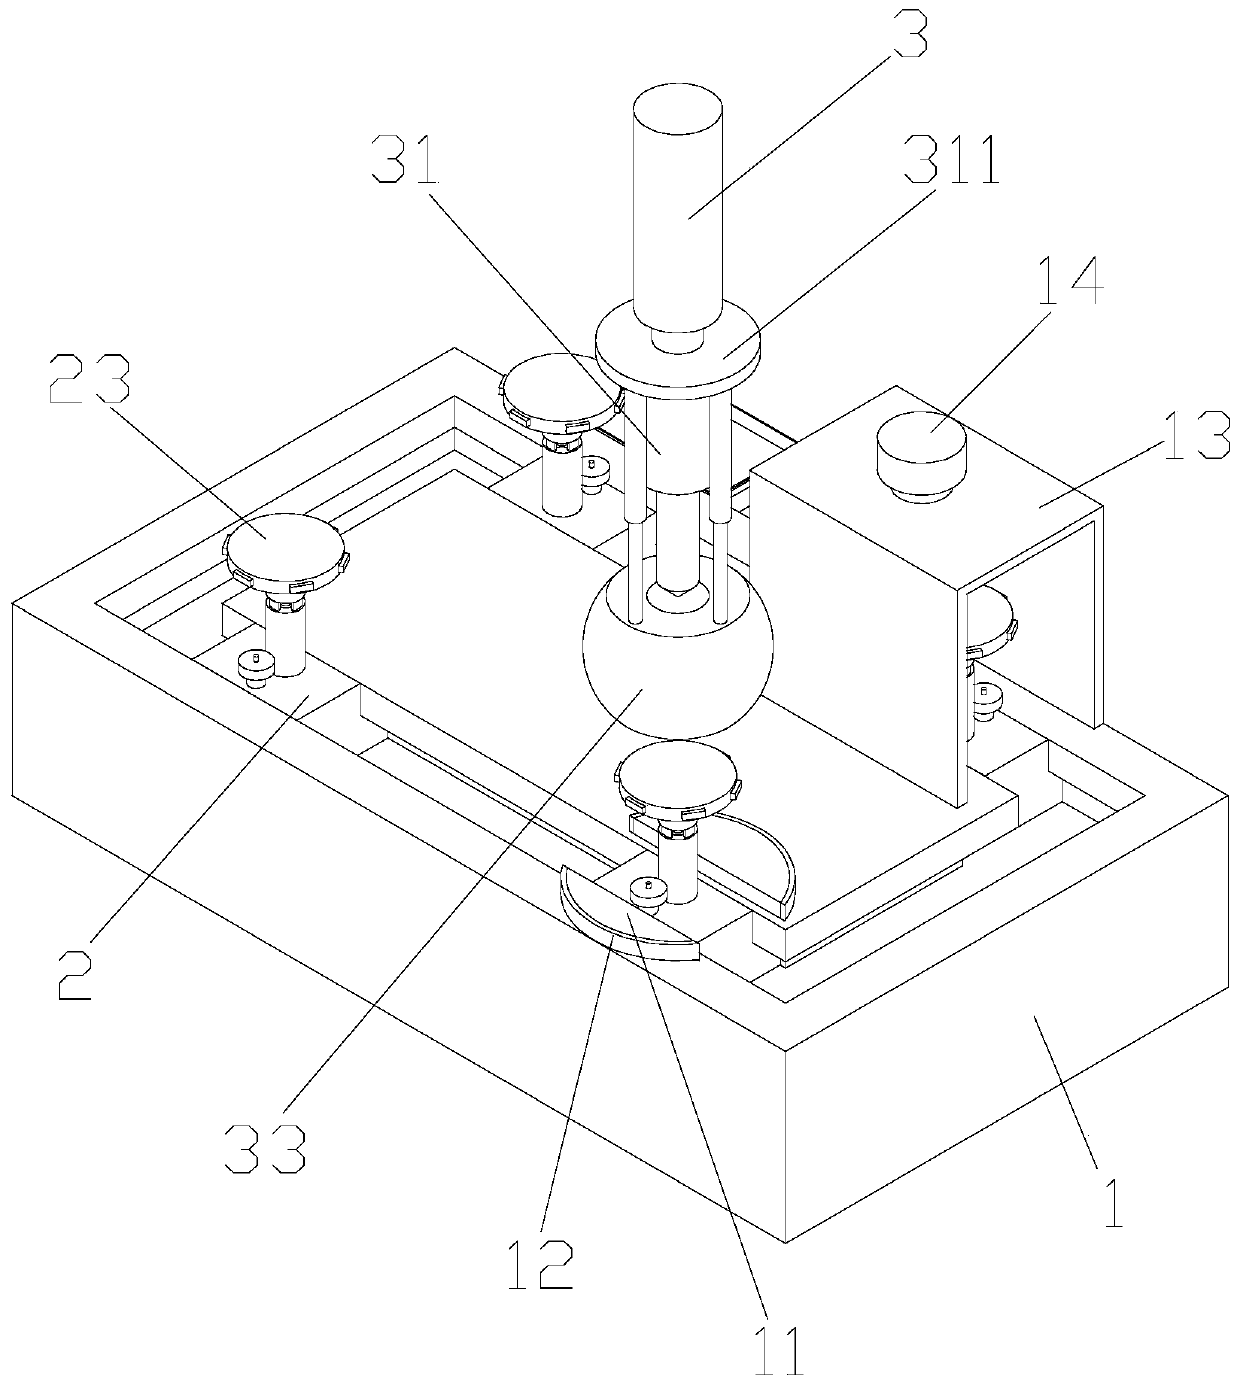 Lampshade punching device used for lighting equipment processing